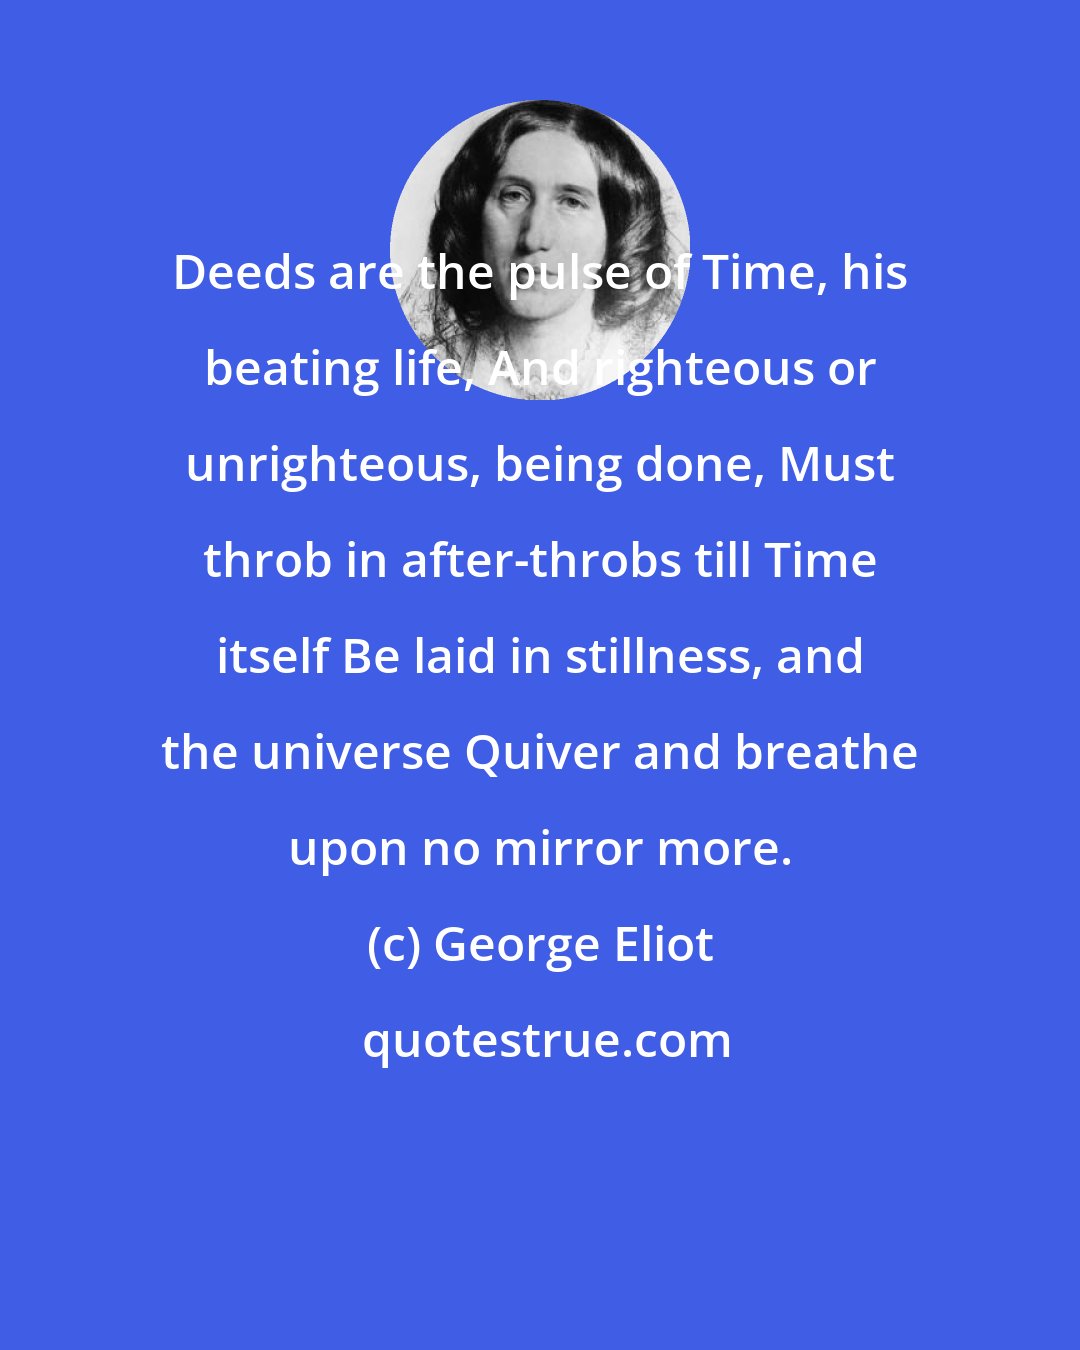 George Eliot: Deeds are the pulse of Time, his beating life, And righteous or unrighteous, being done, Must throb in after-throbs till Time itself Be laid in stillness, and the universe Quiver and breathe upon no mirror more.